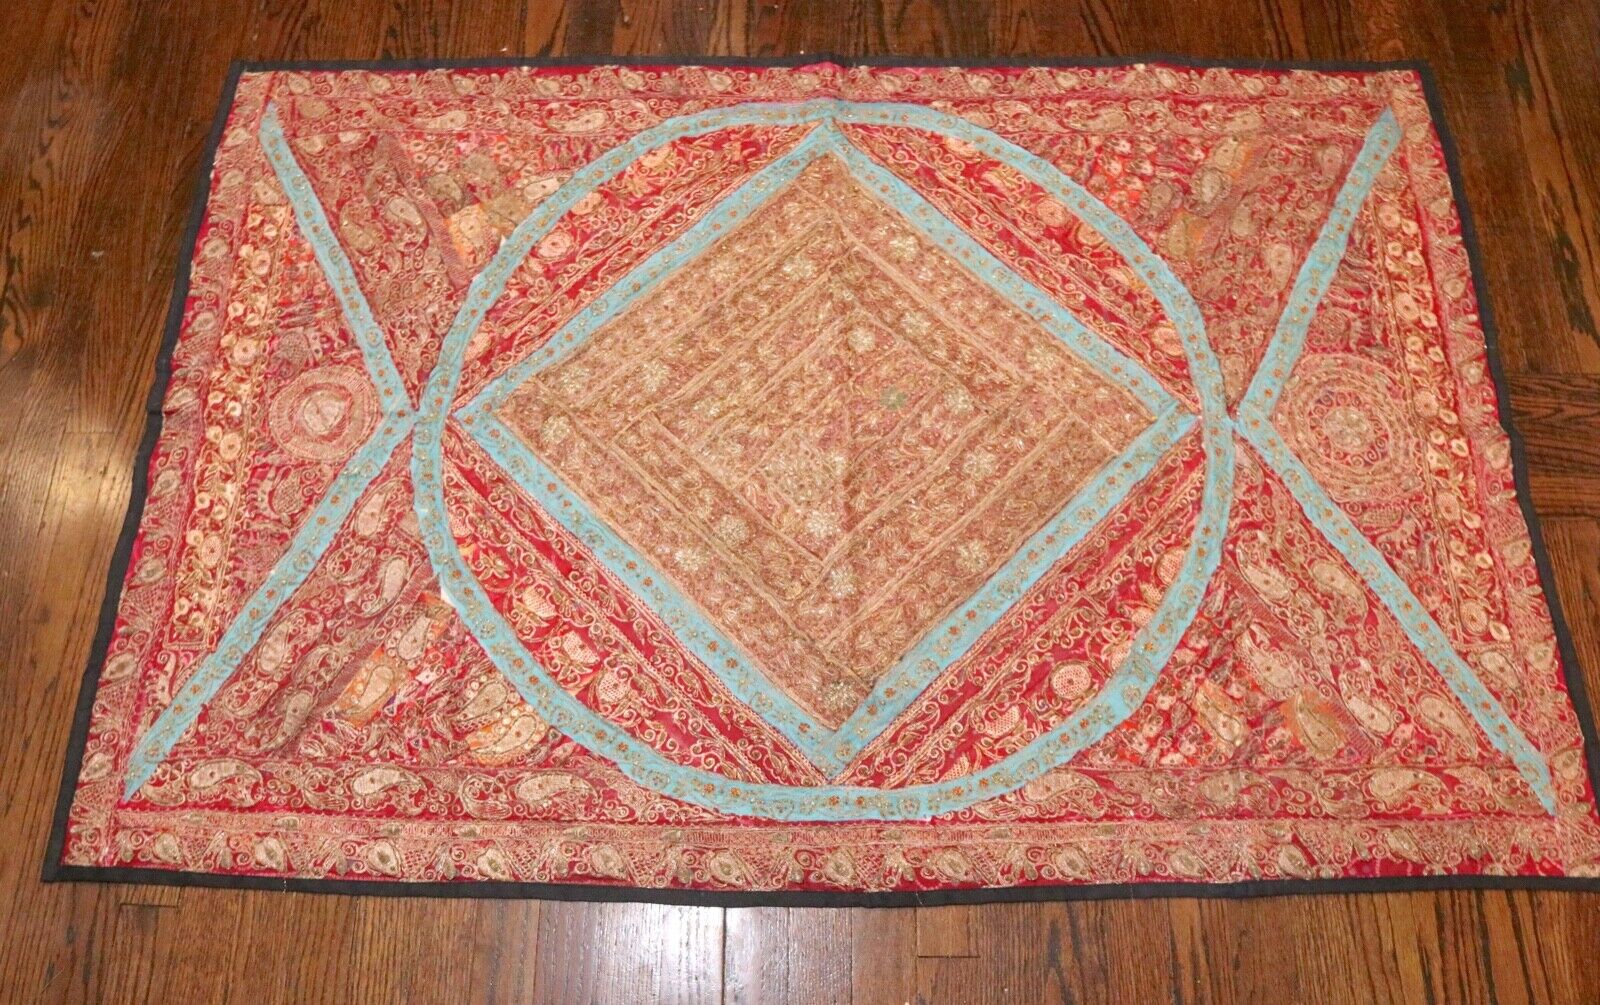 antique hand embroidered turkish metal threaded needlepoint textile tapestry rug